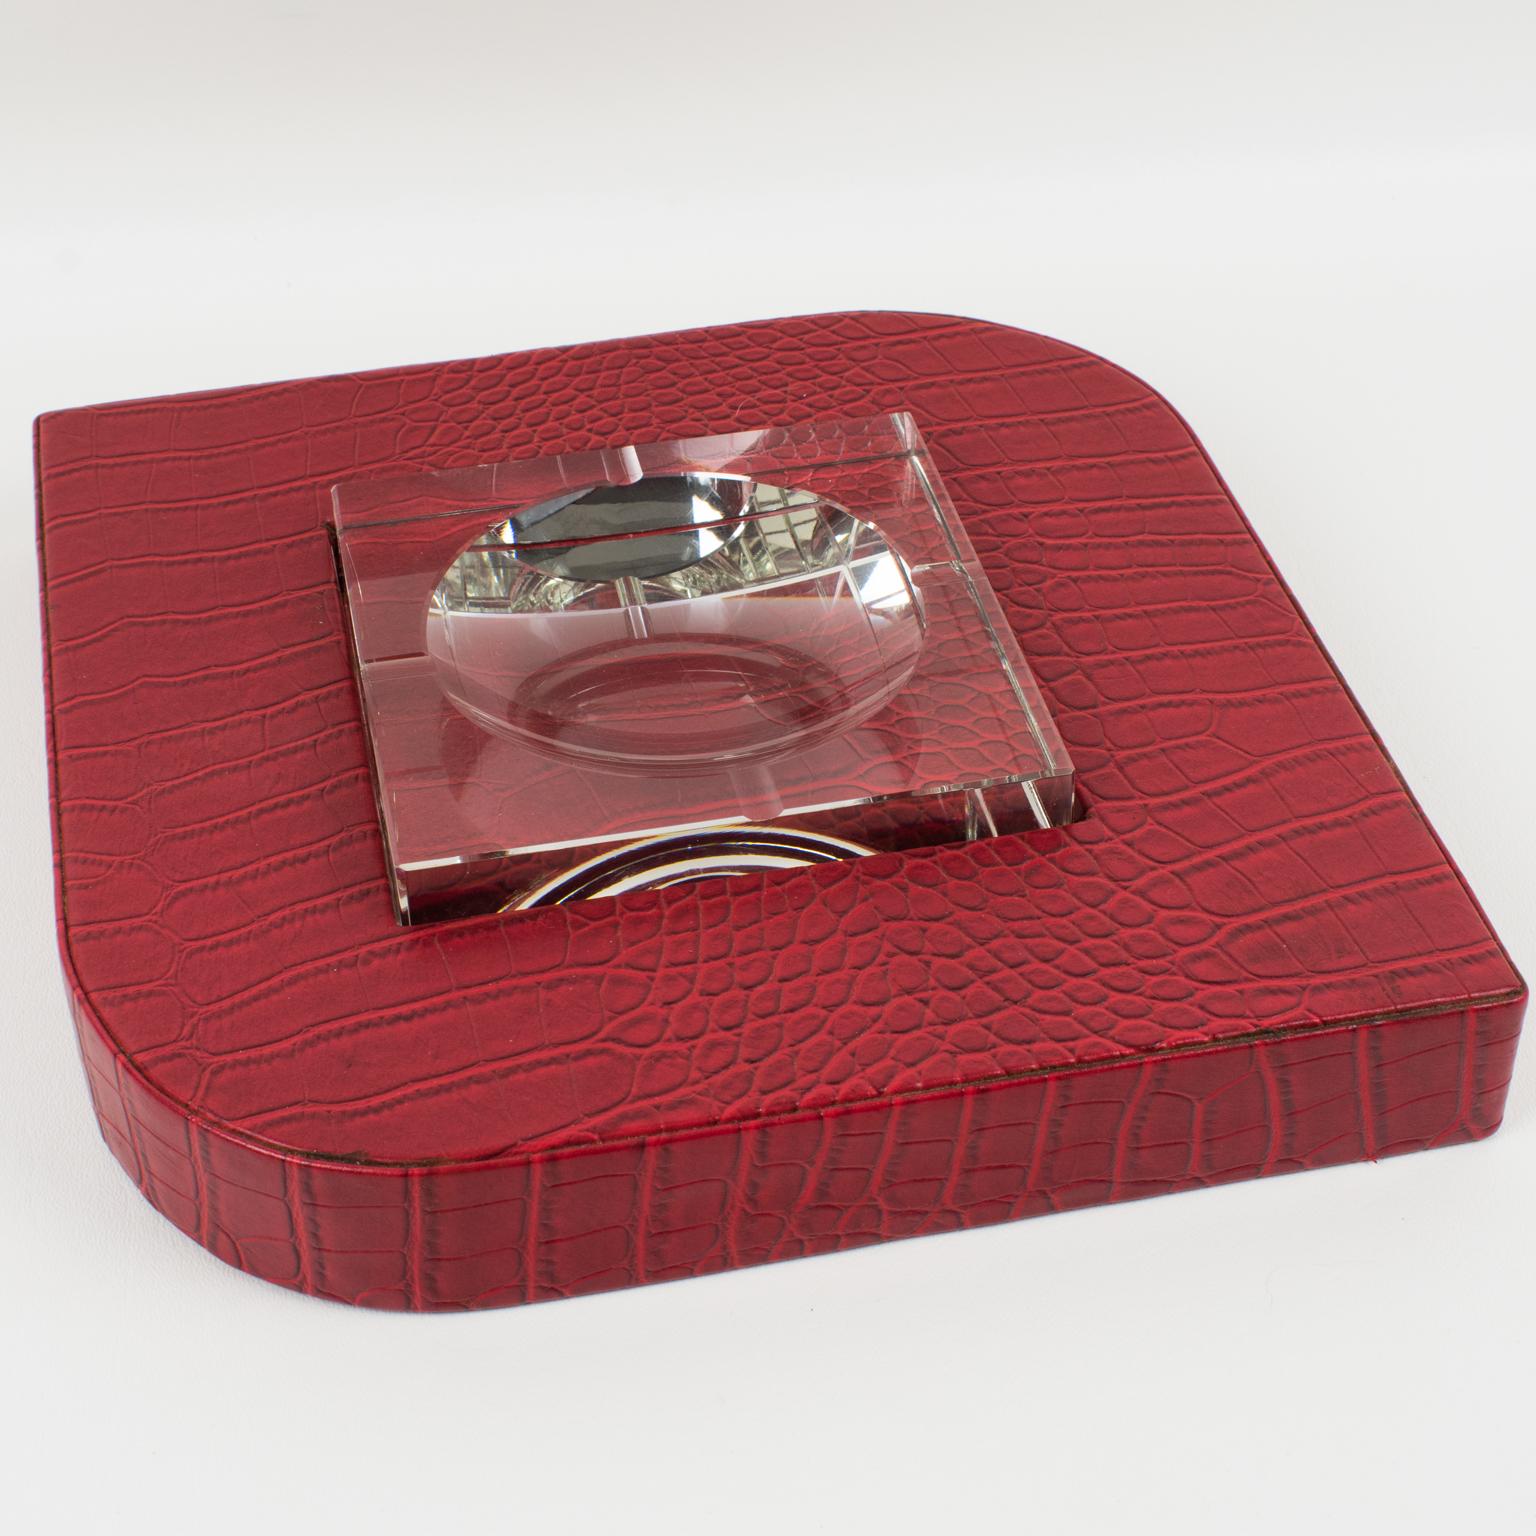 This stylish modernist red leather and crystal vide-poche has a design reminiscent of Dupre-Lafon's work and was crafted in the 1950s. The crocodile-embossed red leather adorns a geometric base, which holds a thick crystal ashtray with beveling.